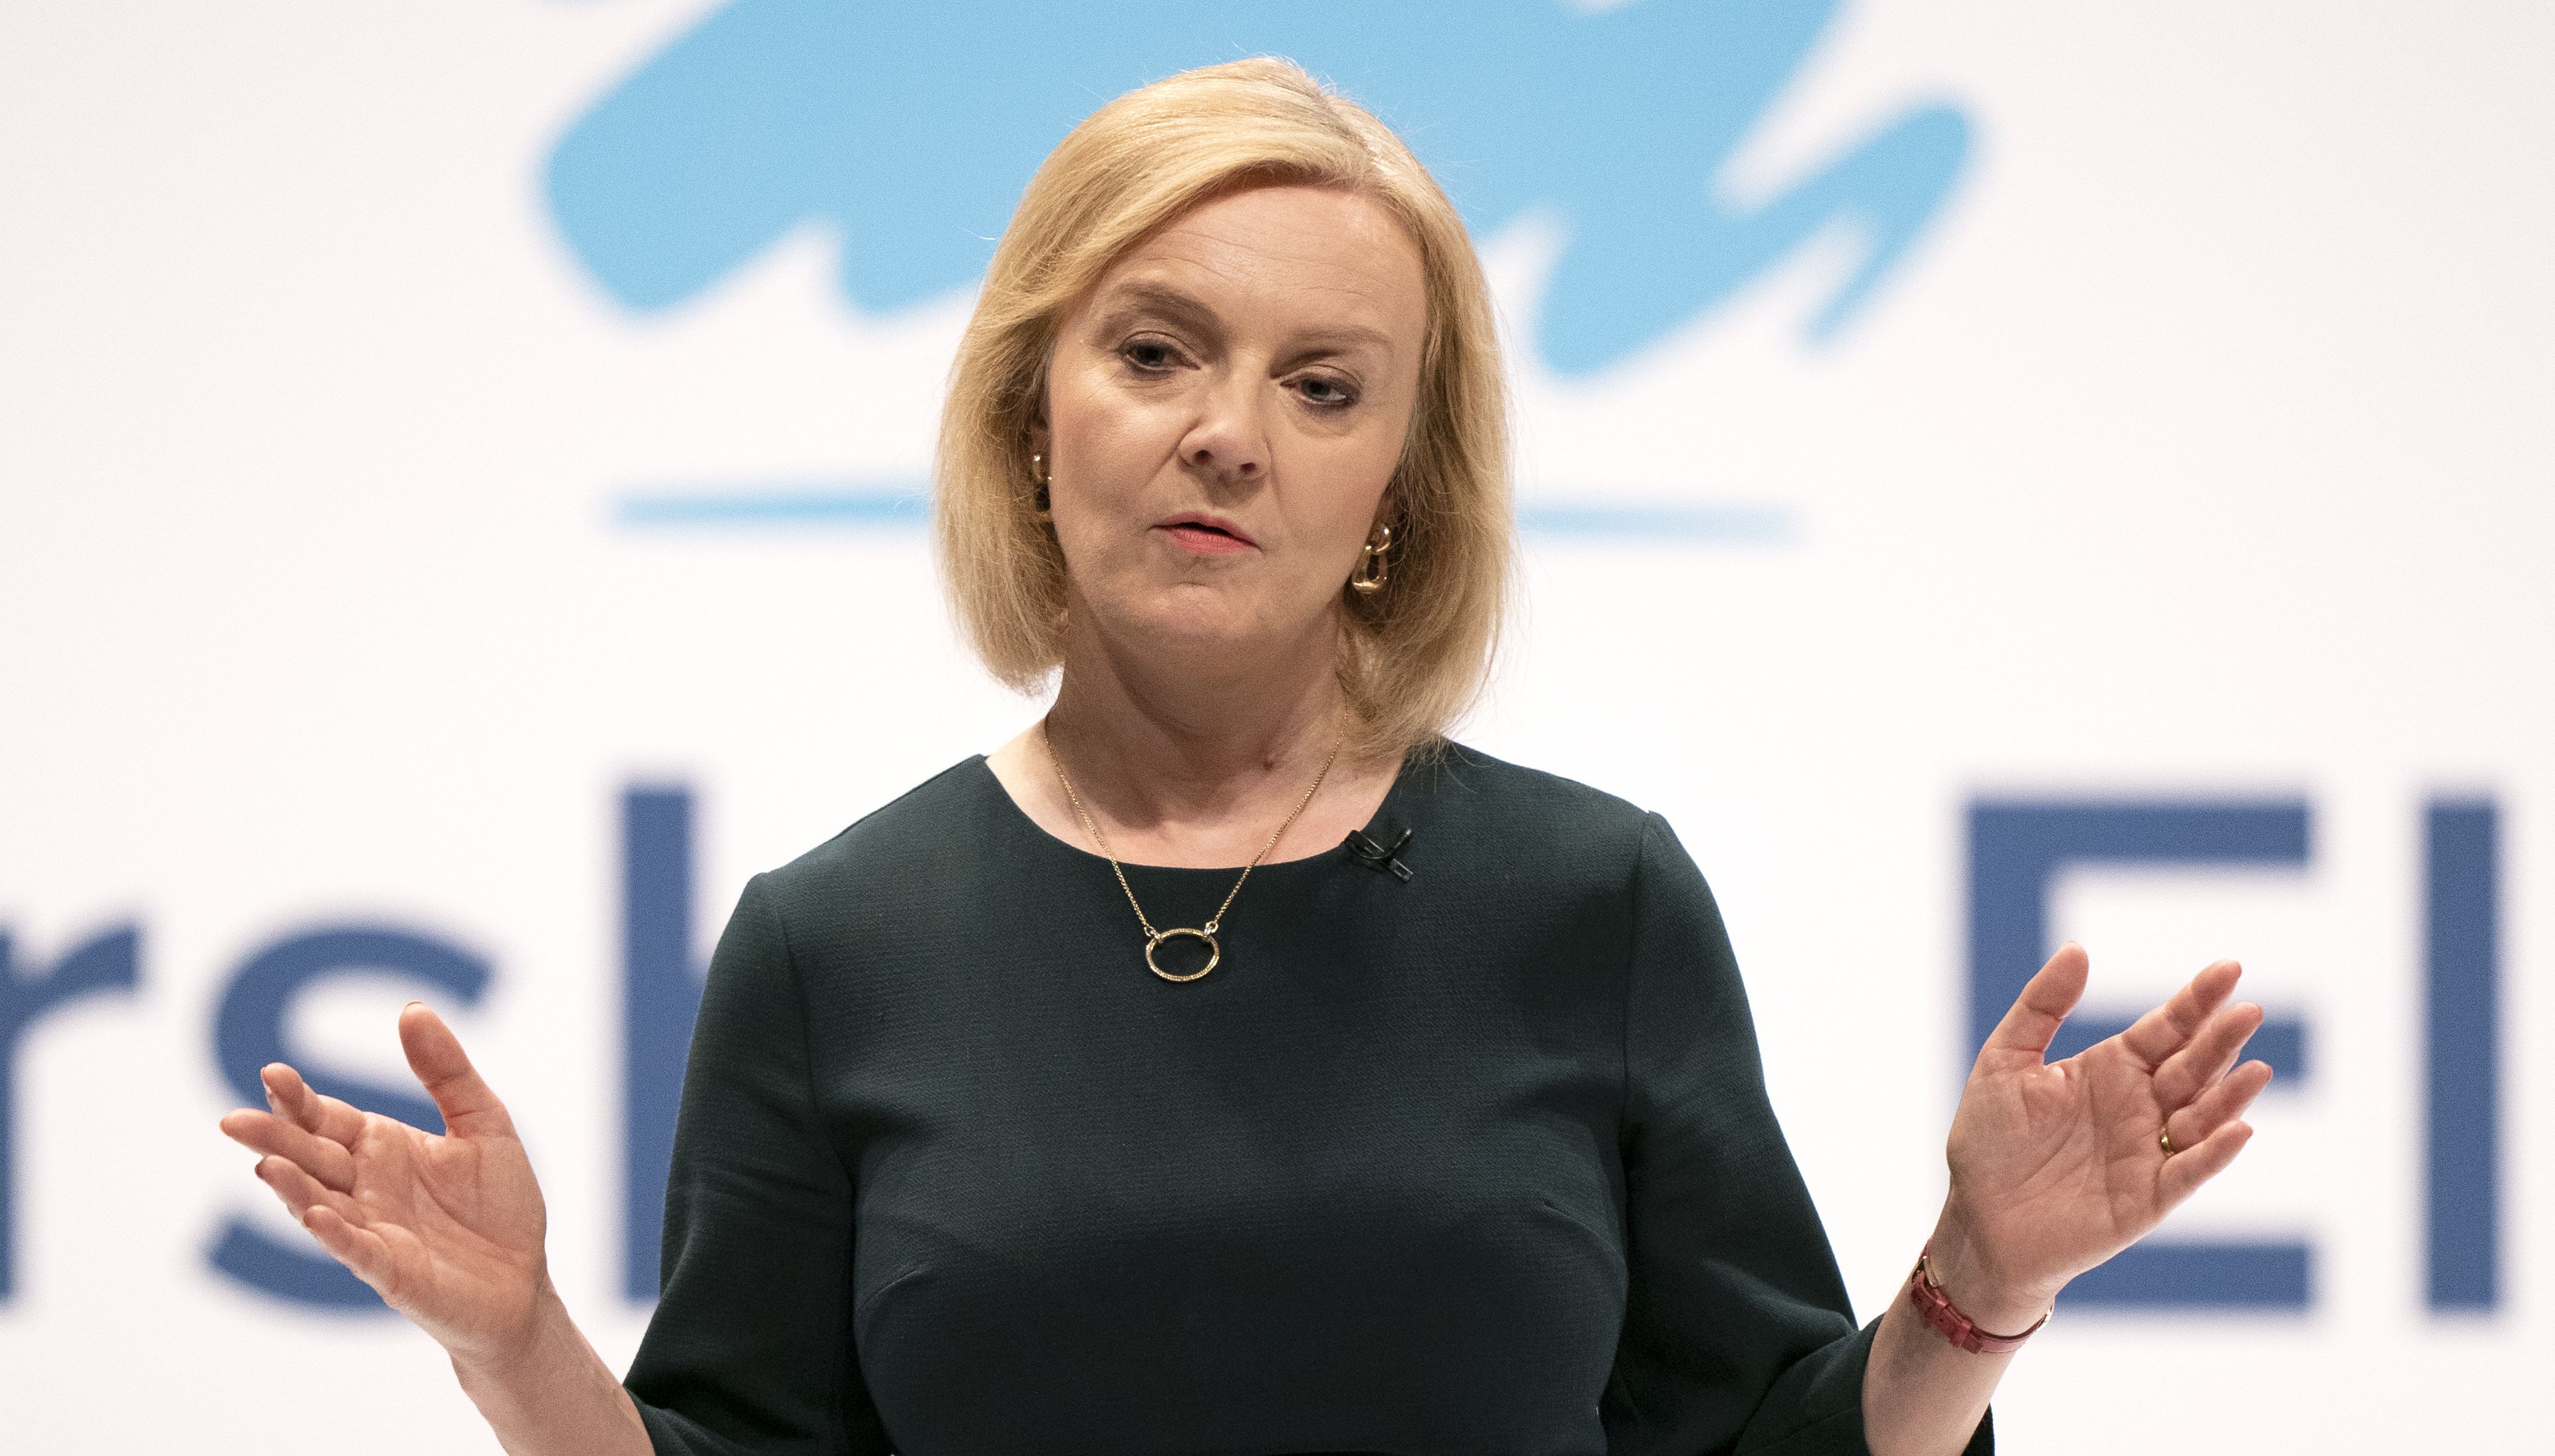 Liz Truss during a hustings event in Perth, Scotland, as part of the campaign to be leader of the Conservative Party and the next prime minister.